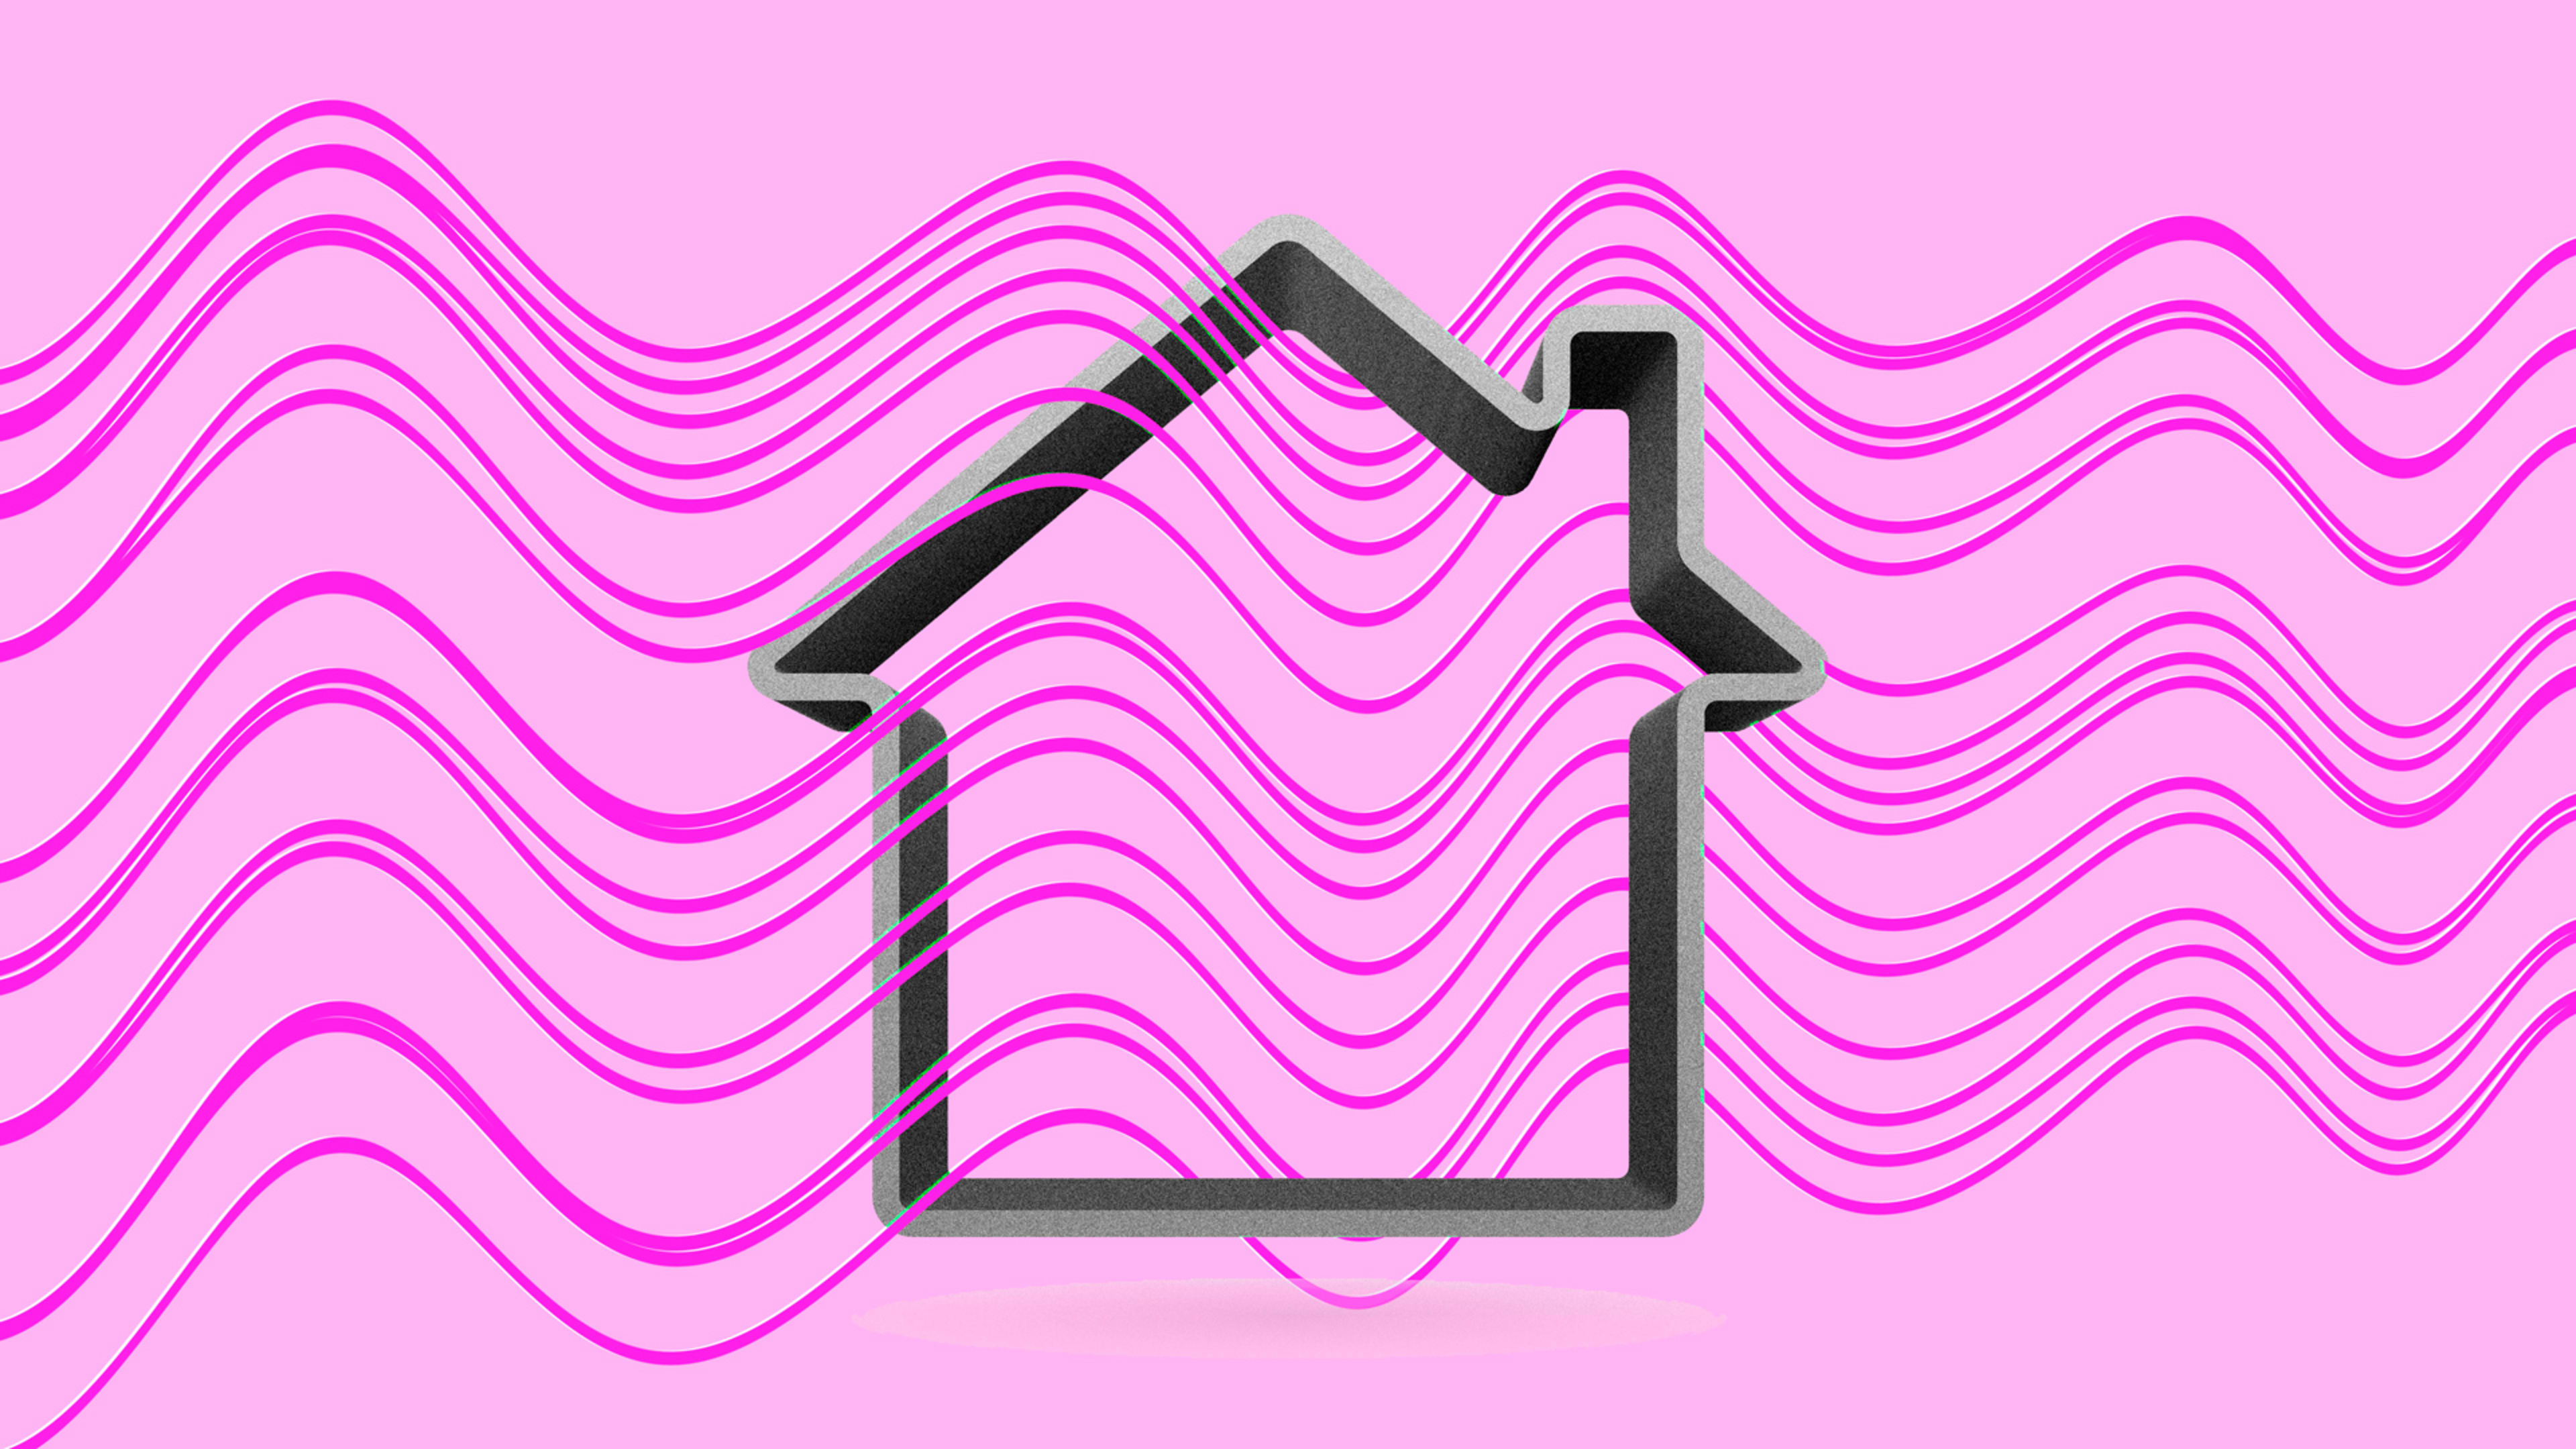 T-Mobile wants your employer to give you home-office wireless broadband